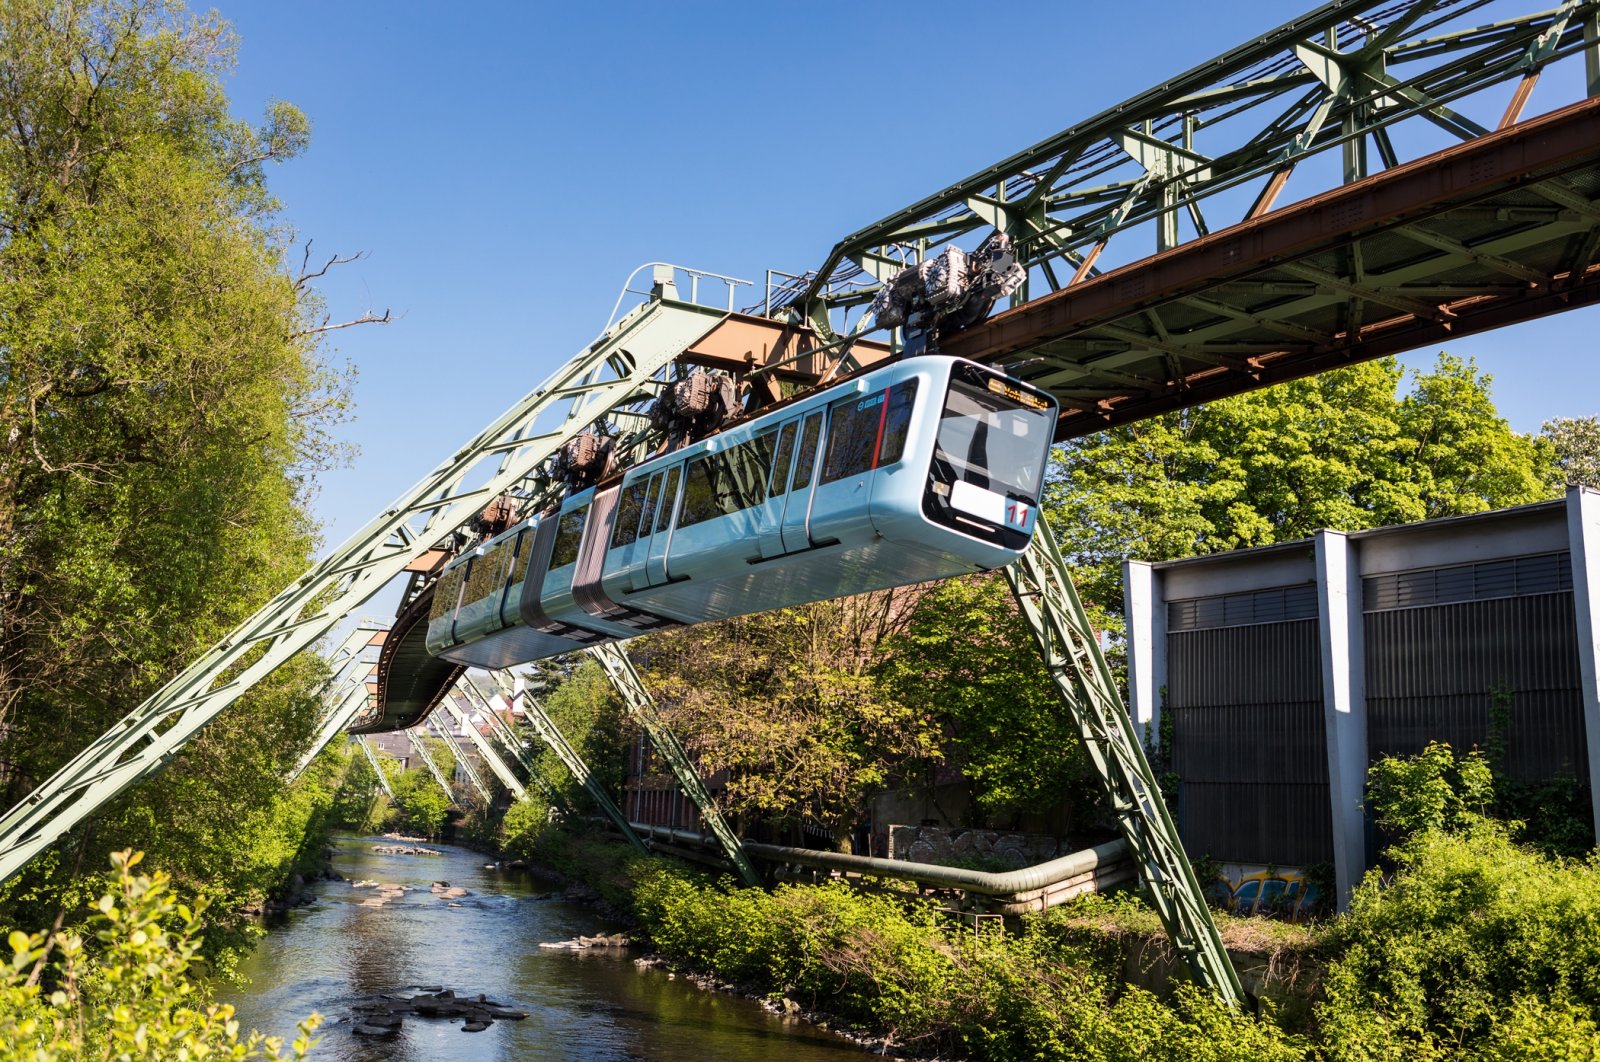 The Wuppertal suspension railway is probably the most famous landmark of this city. (Malte Reiter/Wuppertal Marketing GmbH via dpa)